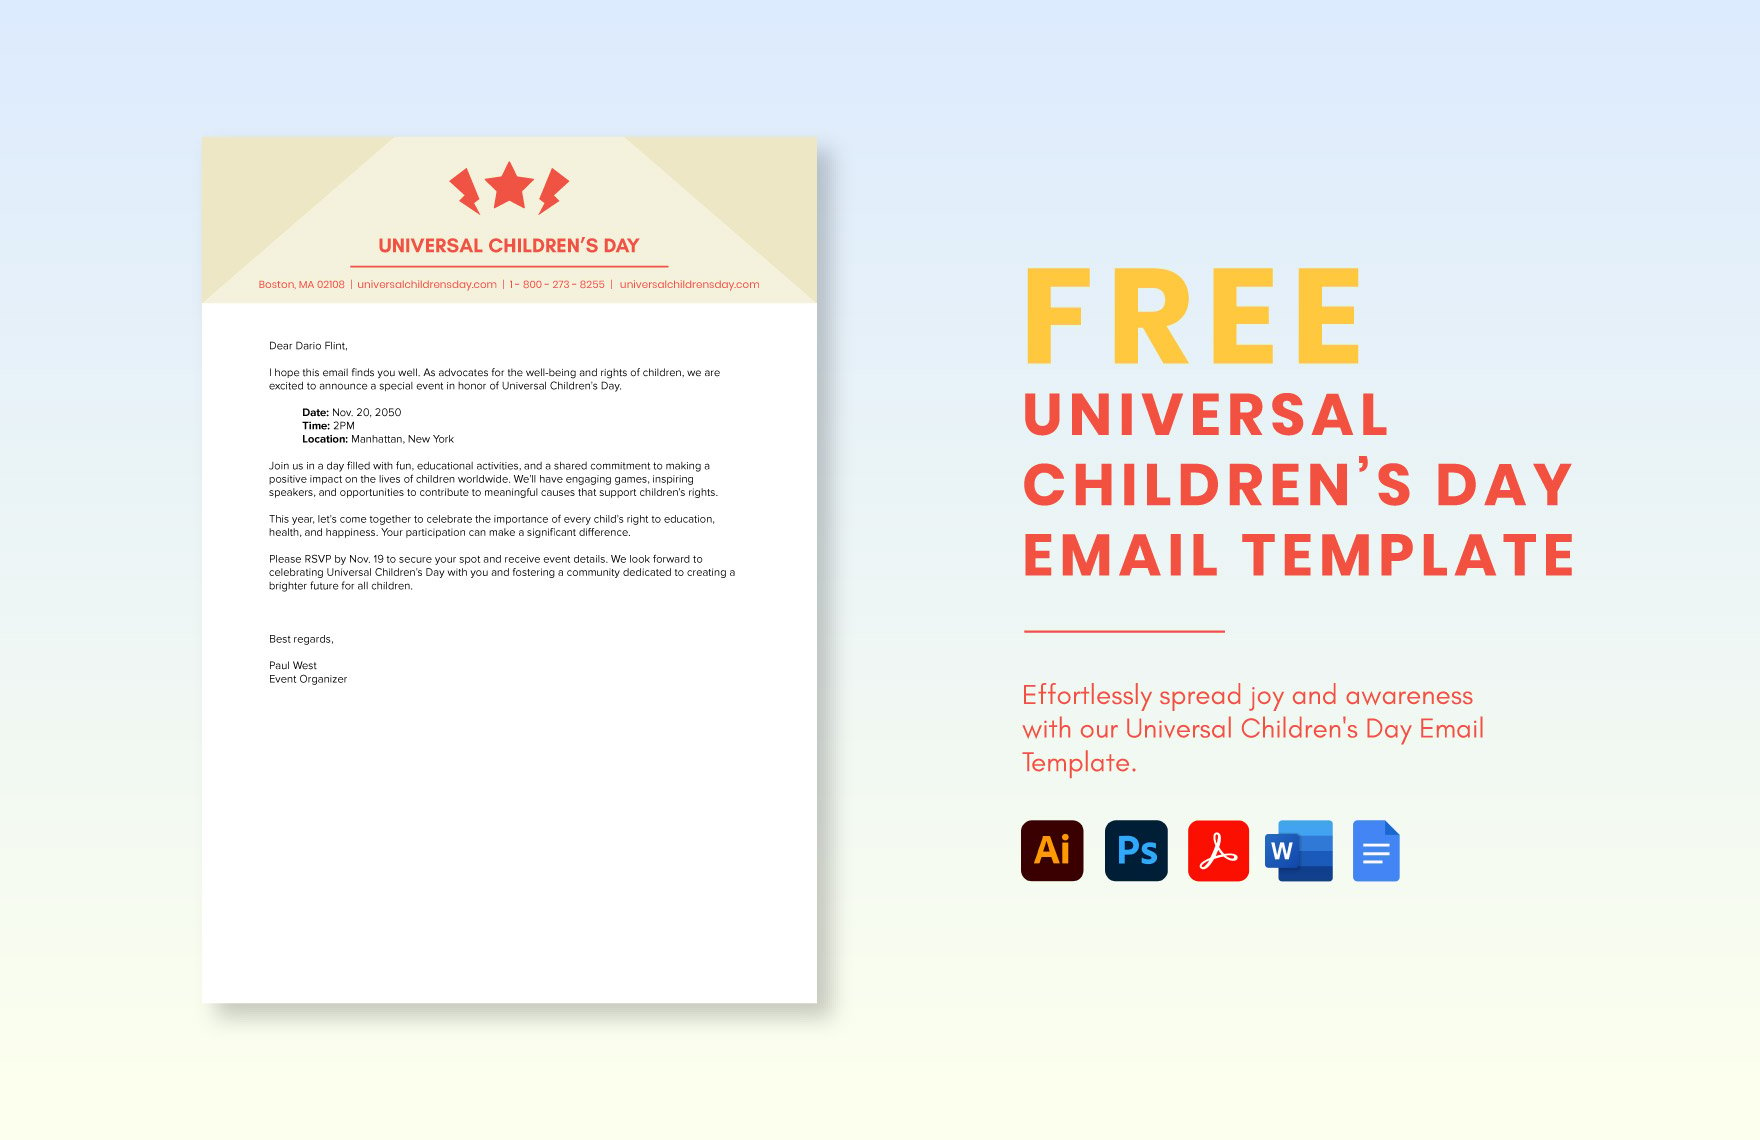 Universal Children’s Day Email Template